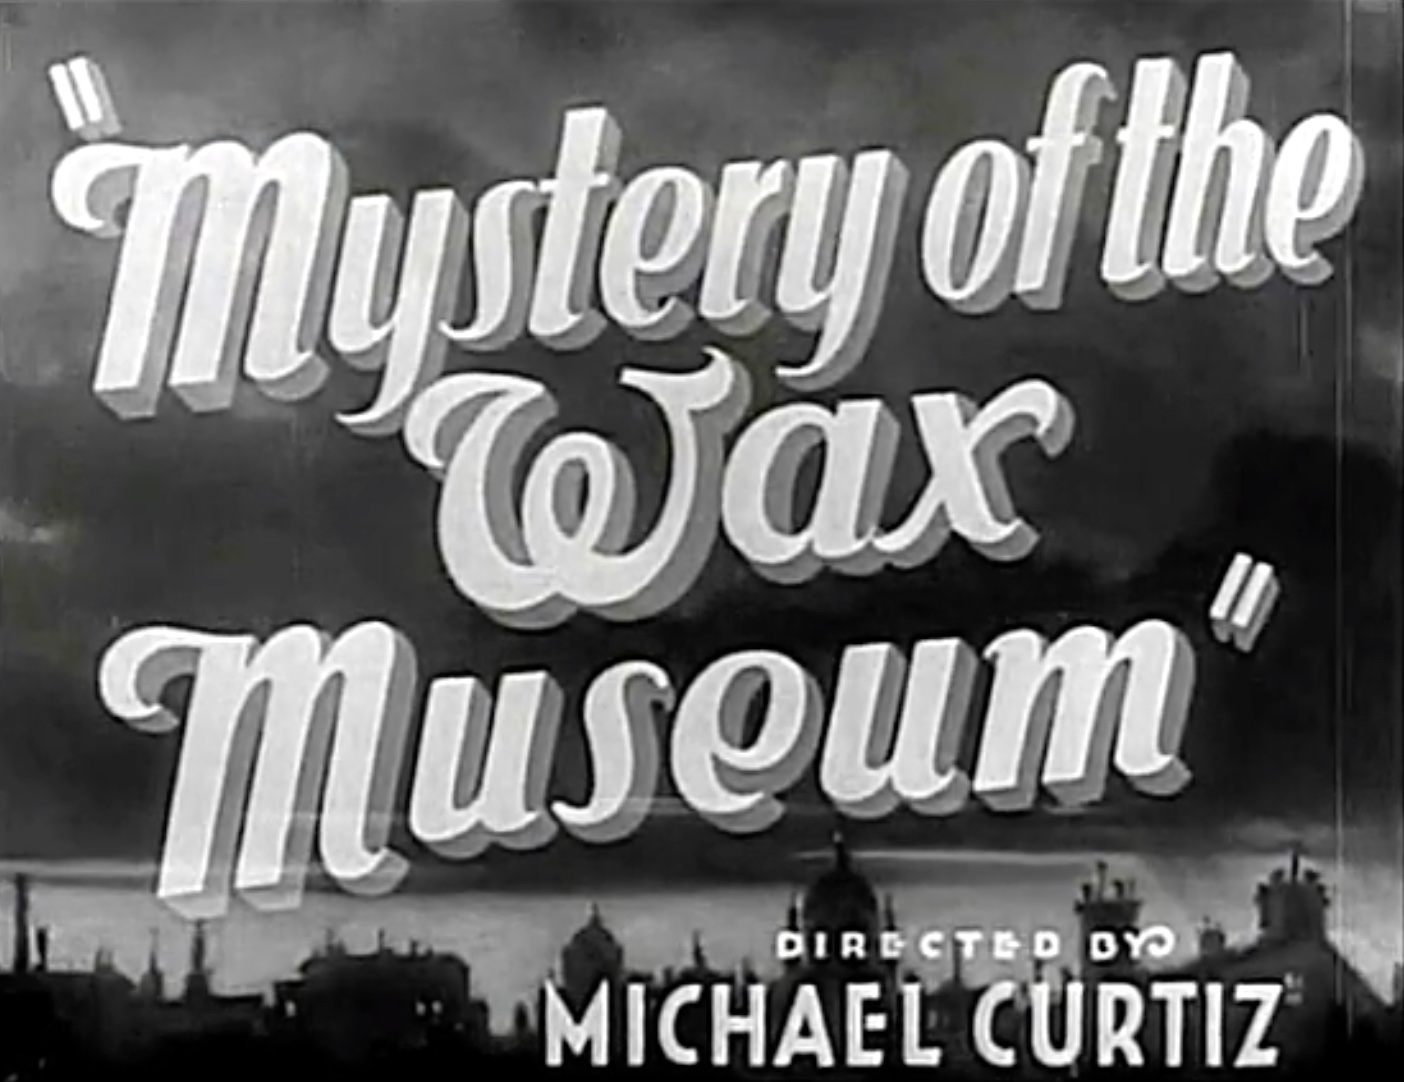 Mystery of the Wax Museum (1933) starring Lionel Atwill, Fay Wray, directed by Michael Curtiz